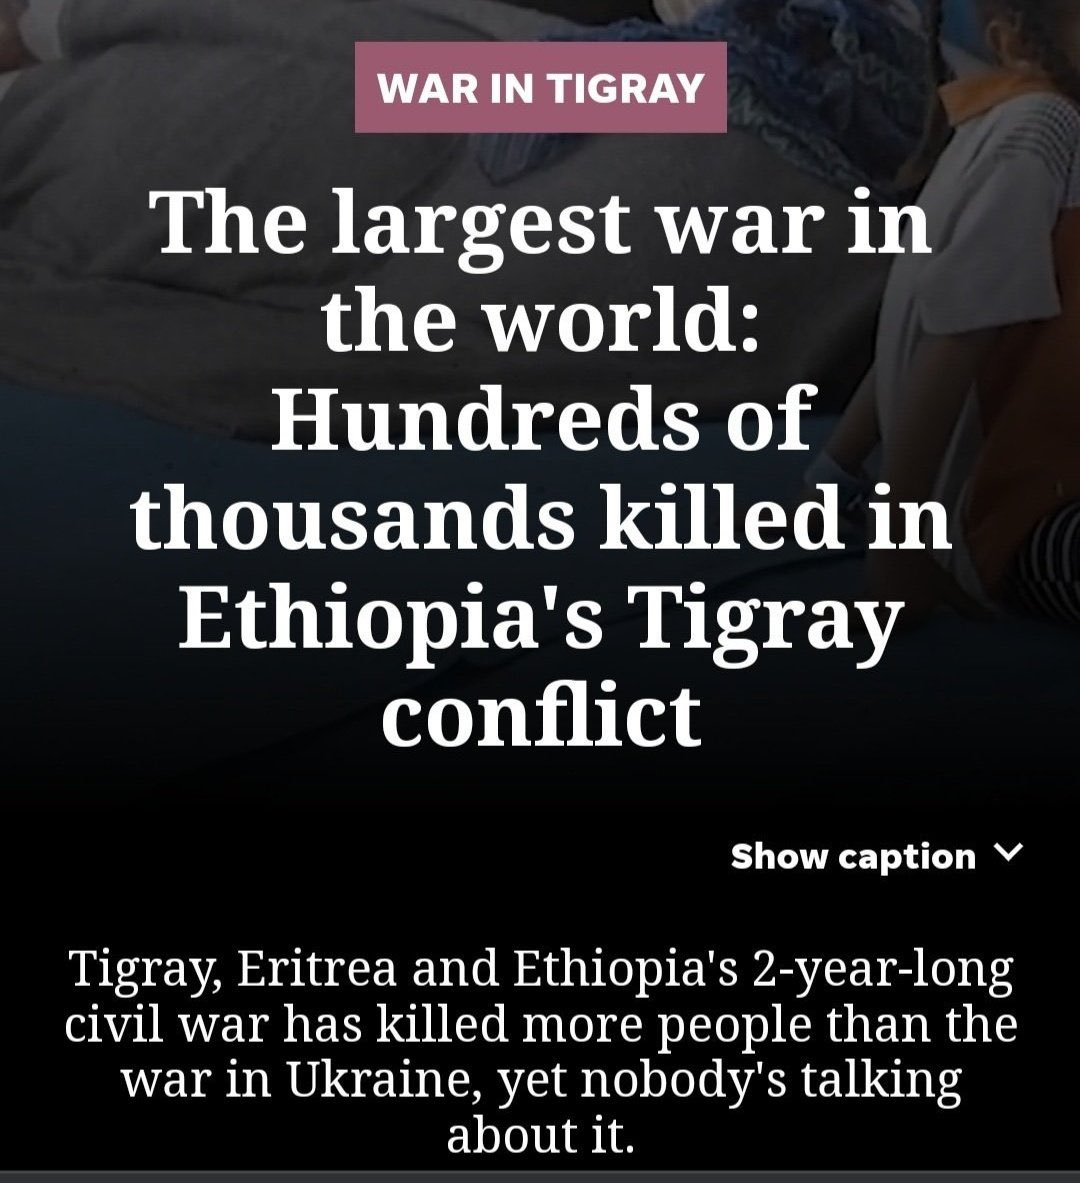 “We will Erase you from this Land!” Were said by #TerroristFano and did acted on it! By torturing, killing & force migrating the people of #Tigray Dear @RepKarenBass @USRepKeating @MikeHammerUSA Please implement #FreeWesternTigray #BringBackHomeTigrayRefugees @MuluDegol